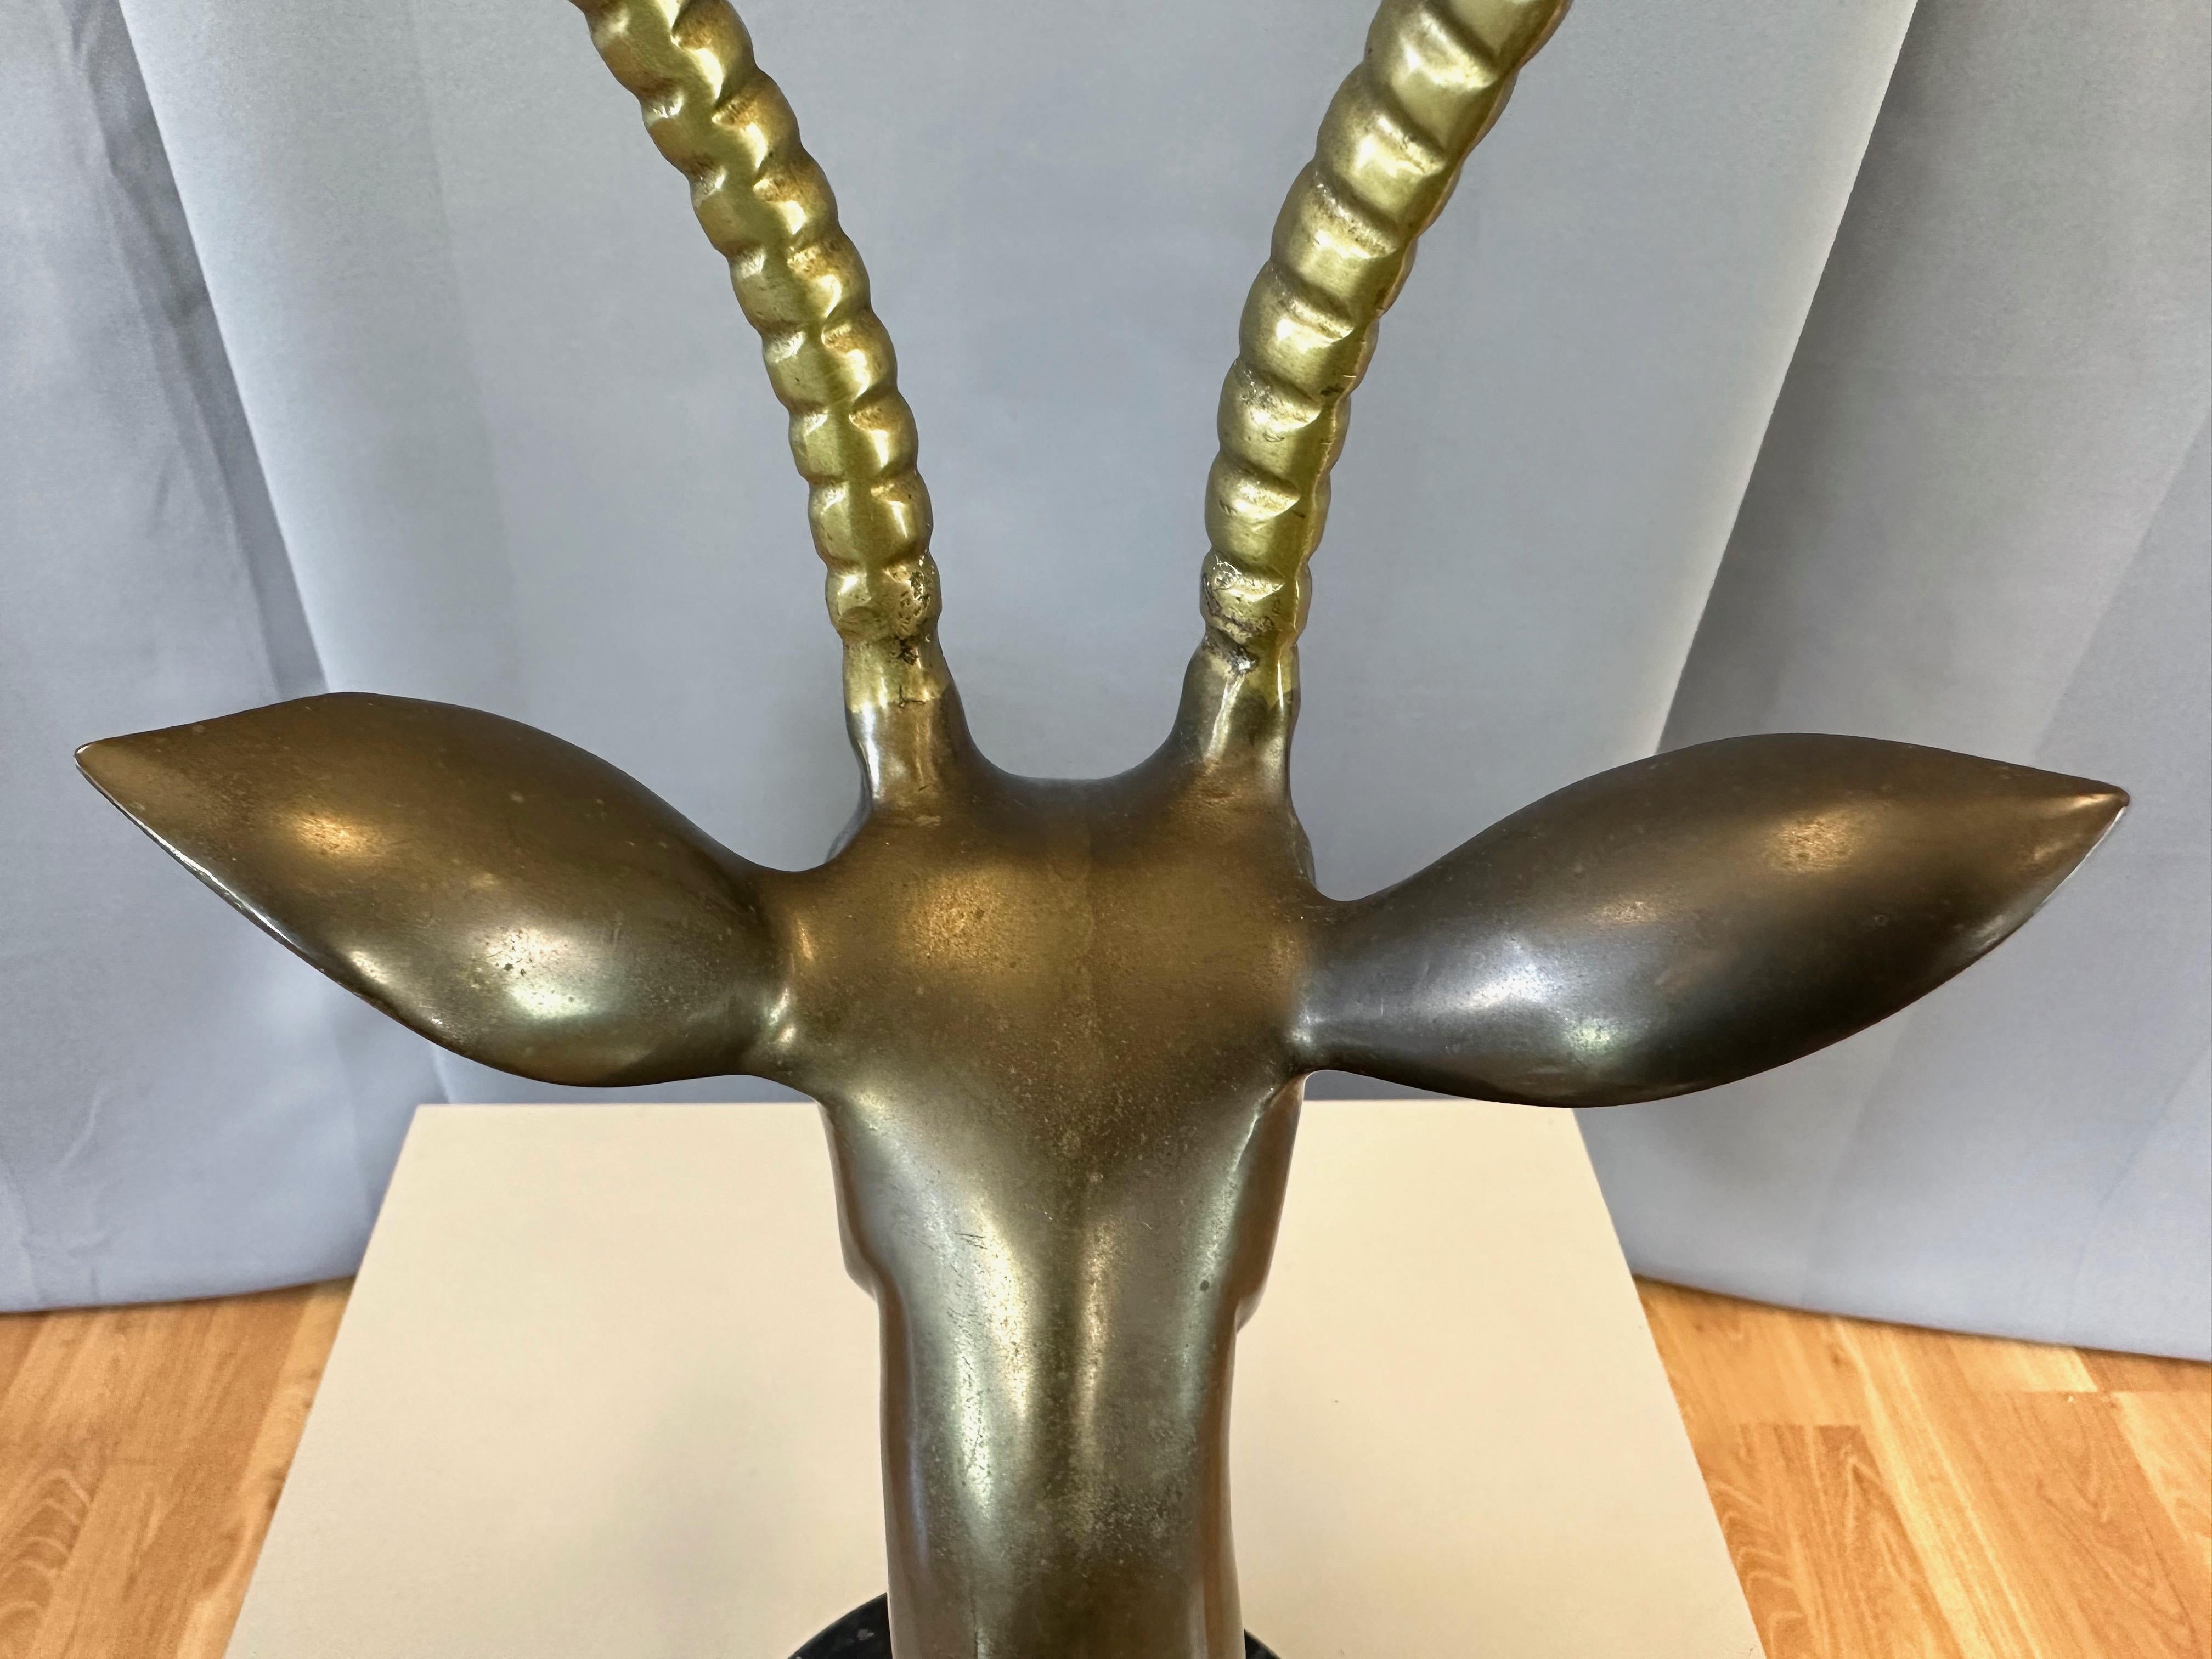 Large Two-Tone Brass Impala Bust Sculpture on Black Marble Base, 1970s For Sale 11